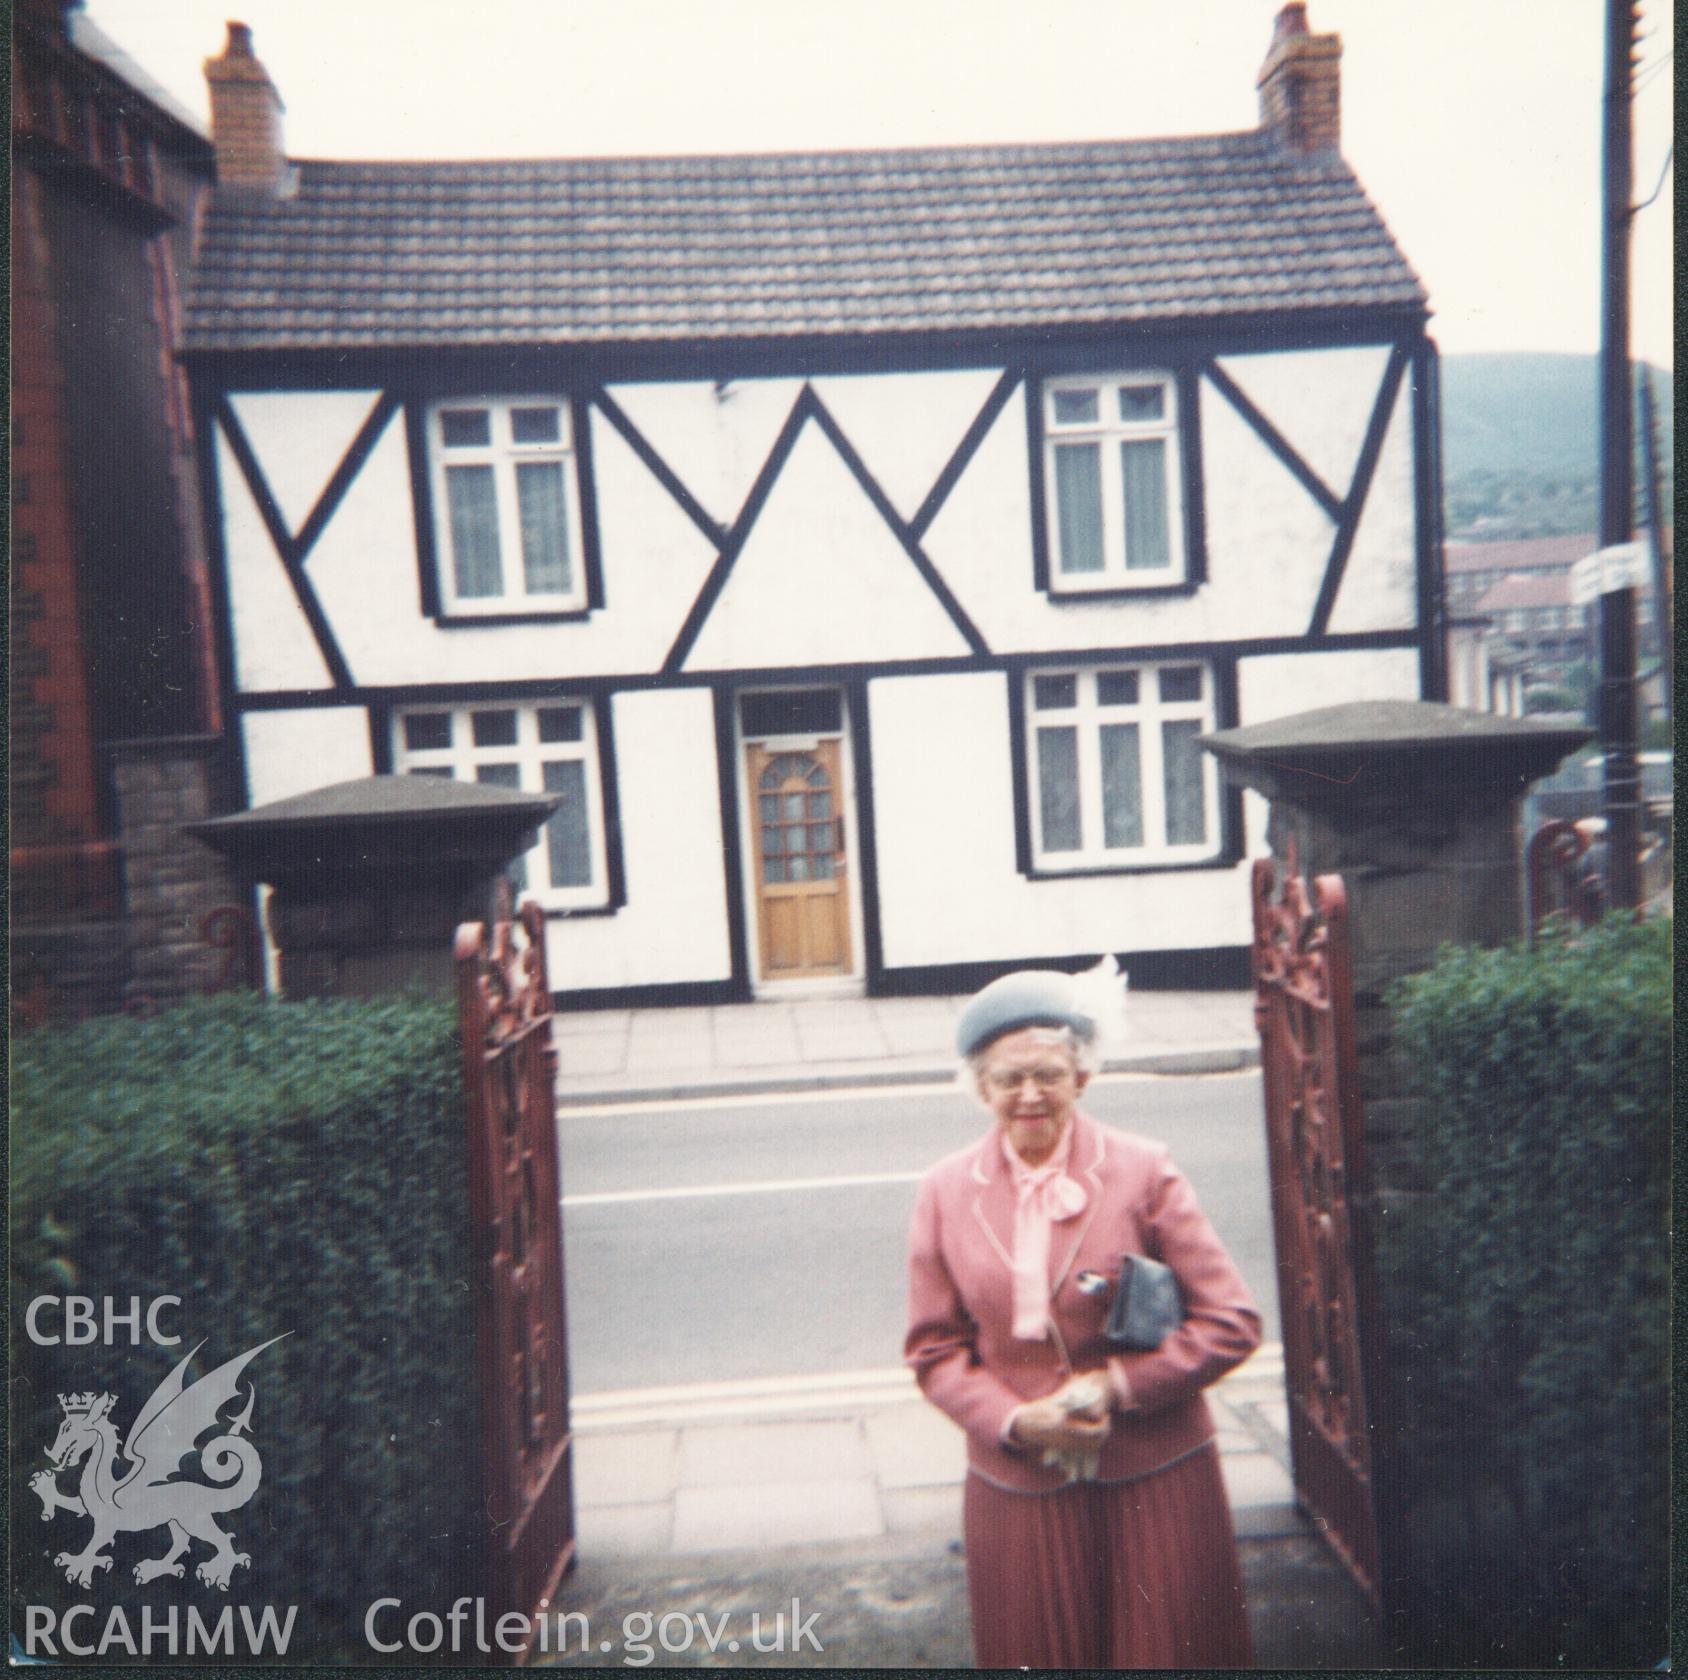 Colour photograph of a member of Bethania chapel congregation on the way to chapel, 26th March 1985. Donated to the RCAHMW by Cyril Philips as part of the Digital Dissent Project.